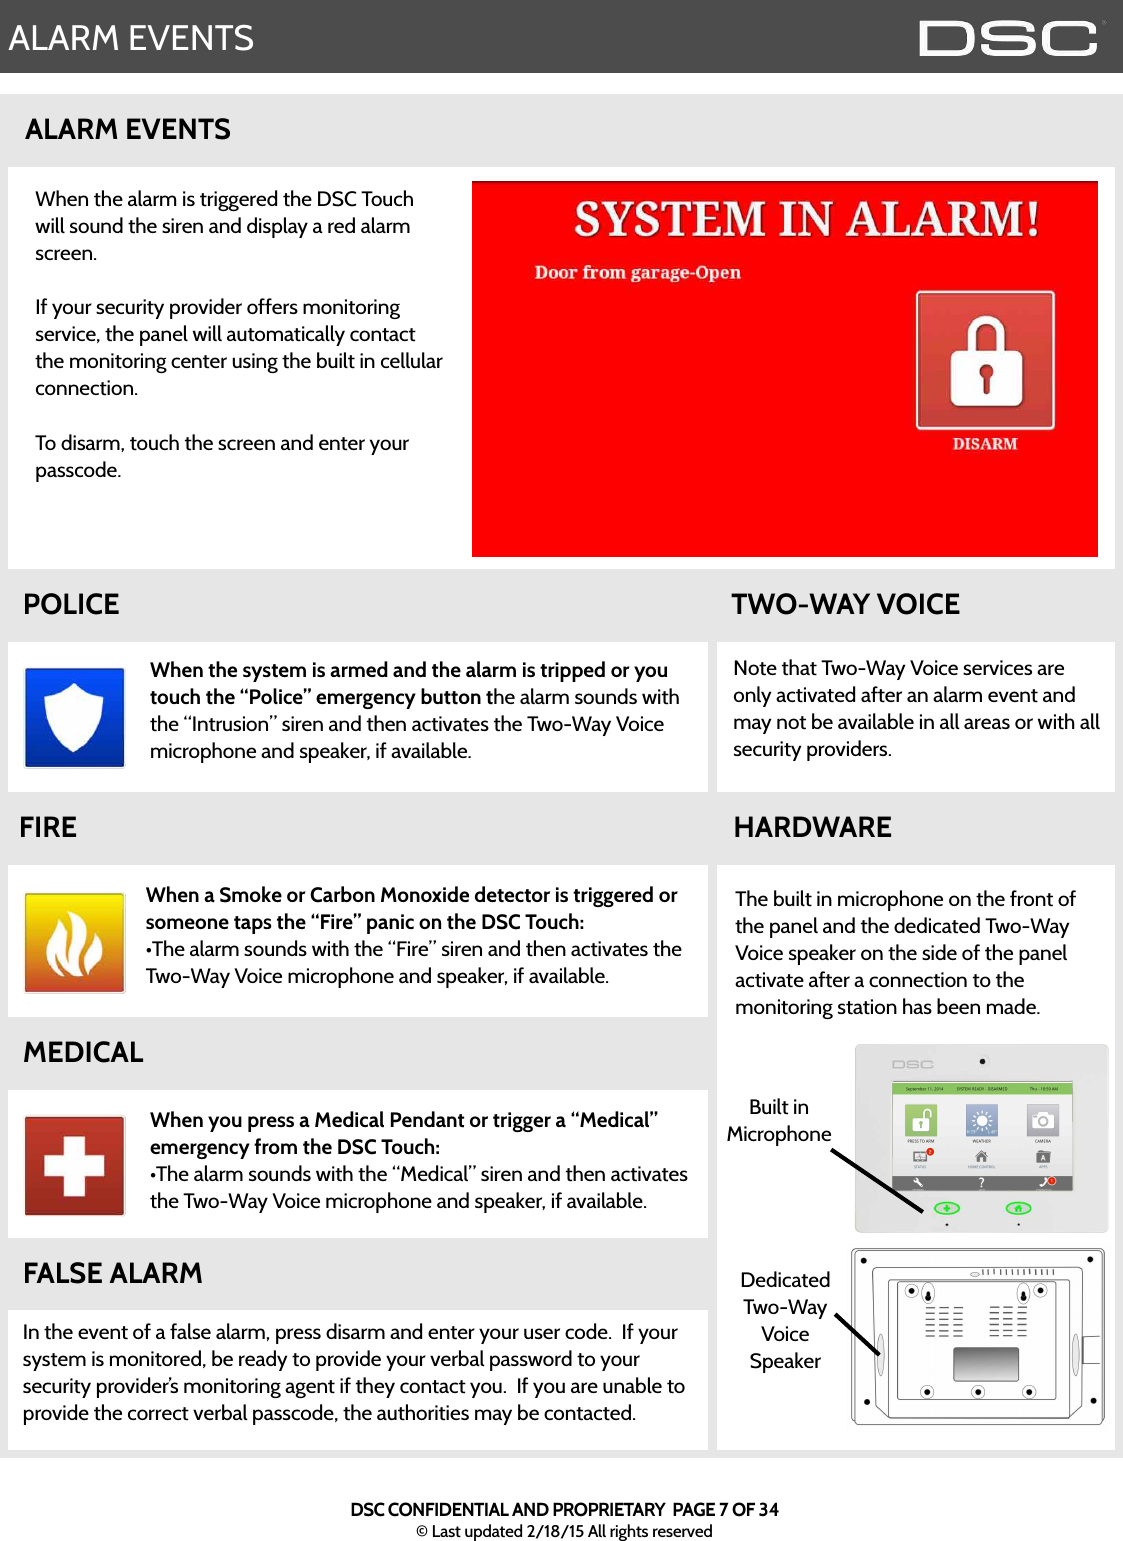 ALARM EVENTSNote that Two-Way Voice services are only activated after an alarm event and may not be available in all areas or with all security providers.  ALARM EVENTSDedicated Two-Way Voice SpeakerWhen the system is armed and the alarm is tripped or you touch the “Police” emergency button the alarm sounds with the “Intrusion” siren and then activates the Two-Way Voice microphone and speaker, if available.  HARDWAREThe built in microphone on the front of the panel and the dedicated Two-Way Voice speaker on the side of the panel activate after a connection to the monitoring station has been made.  FALSE ALARMIn the event of a false alarm, press disarm and enter your user code.  If your system is monitored, be ready to provide your verbal password to your security provider’s monitoring agent if they contact you.  If you are unable to provide the correct verbal passcode, the authorities may be contacted.  When a Smoke or Carbon Monoxide detector is triggered or someone taps the “Fire” panic on the DSC Touch:•The alarm sounds with the “Fire” siren and then activates the Two-Way Voice microphone and speaker, if available.  When you press a Medical Pendant or trigger a “Medical” emergency from the DSC Touch:•The alarm sounds with the “Medical” siren and then activates the Two-Way Voice microphone and speaker, if available.  MEDICALFIRETWO-WAY VOICEPOLICEWhen the alarm is triggered the DSC Touch will sound the siren and display a red alarm screen.  If your security provider offers monitoring service, the panel will automatically contact the monitoring center using the built in cellular connection.  To disarm, touch the screen and enter your passcode.  Built in MicrophoneDSC CONFIDENTIAL AND PROPRIETARY  PAGE 7 OF 34© Last updated 2/18/15 All rights reserved